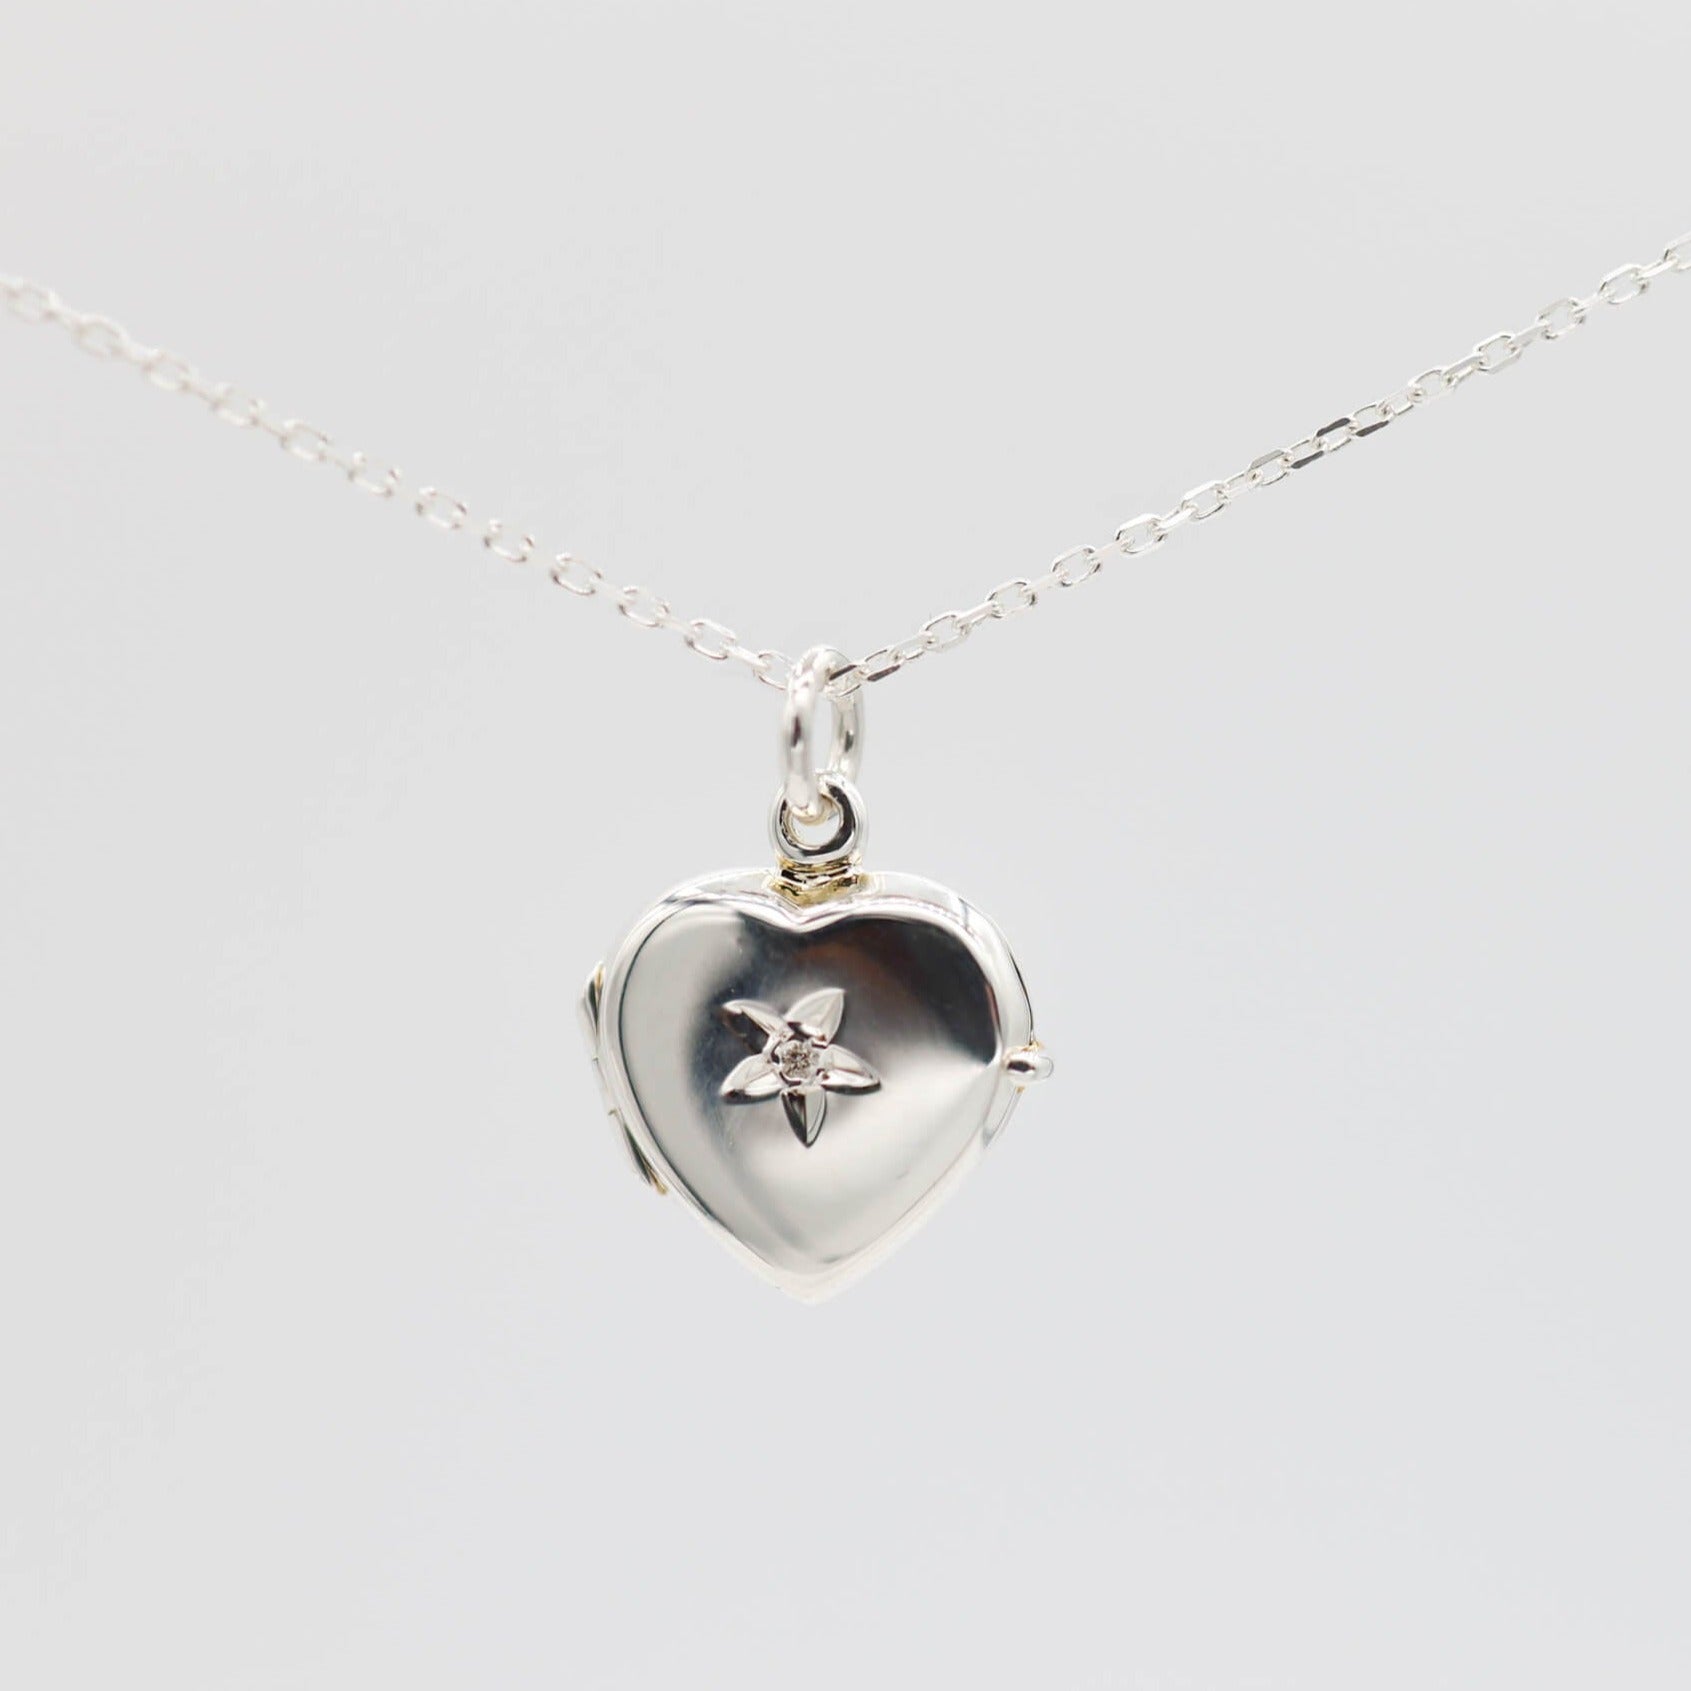 Heart shaped locket, Sterling Silver with White Diamond inset |Comes  complete with photos inserted, silver chain and gift box | Anna | The  Locket Shop